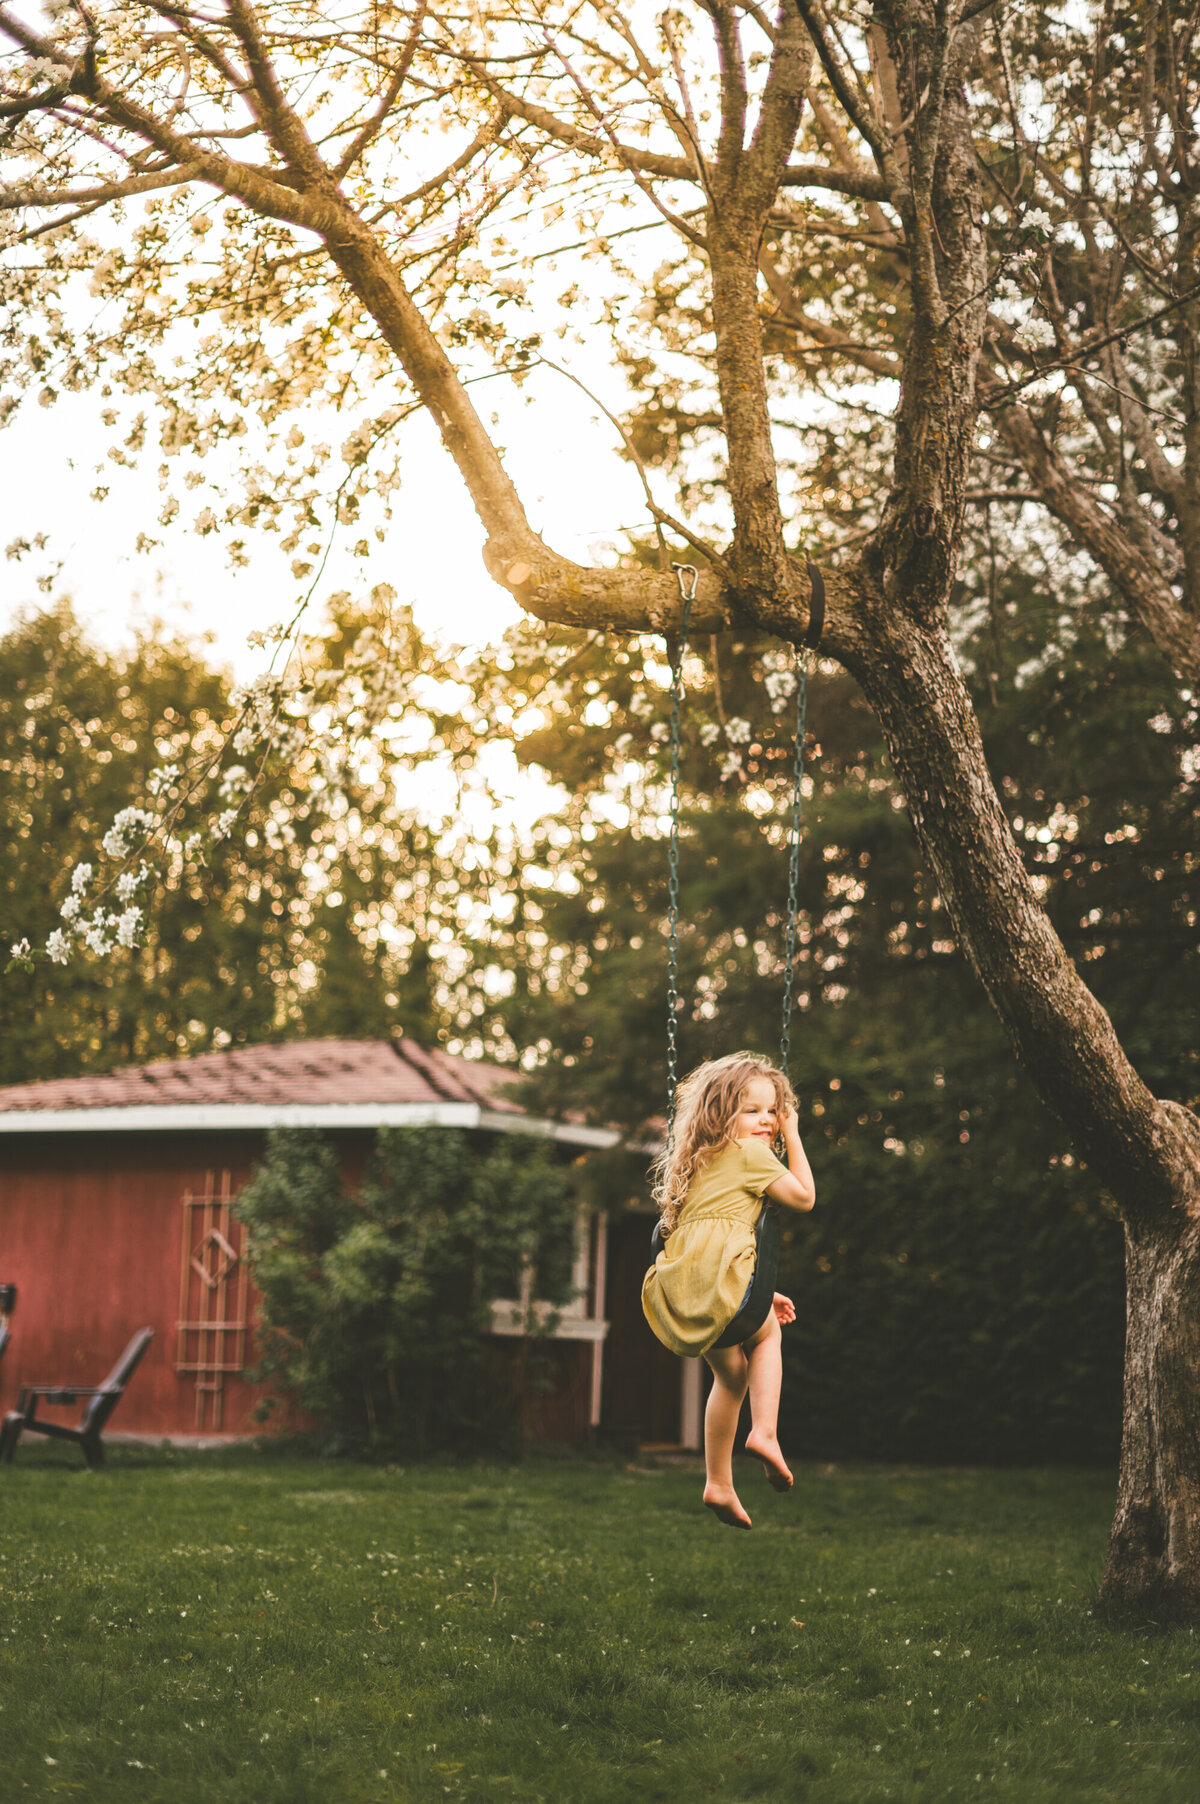 Girl with blond curly hair, sitting barefoot in a swing in a tree.